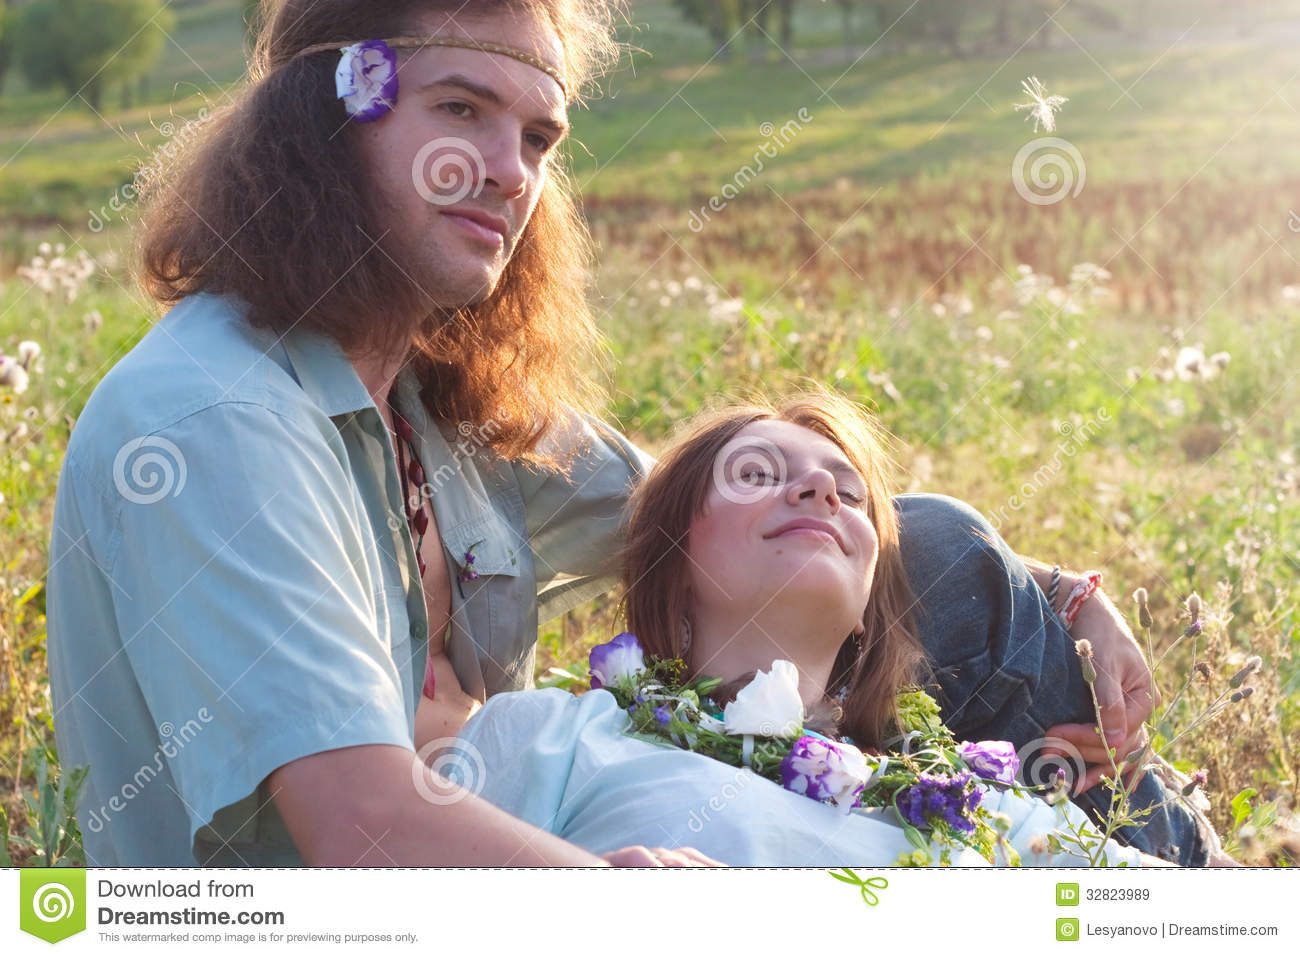 Couple Sunlight Enamoured Hippie Royalty Free Stock Images   Image